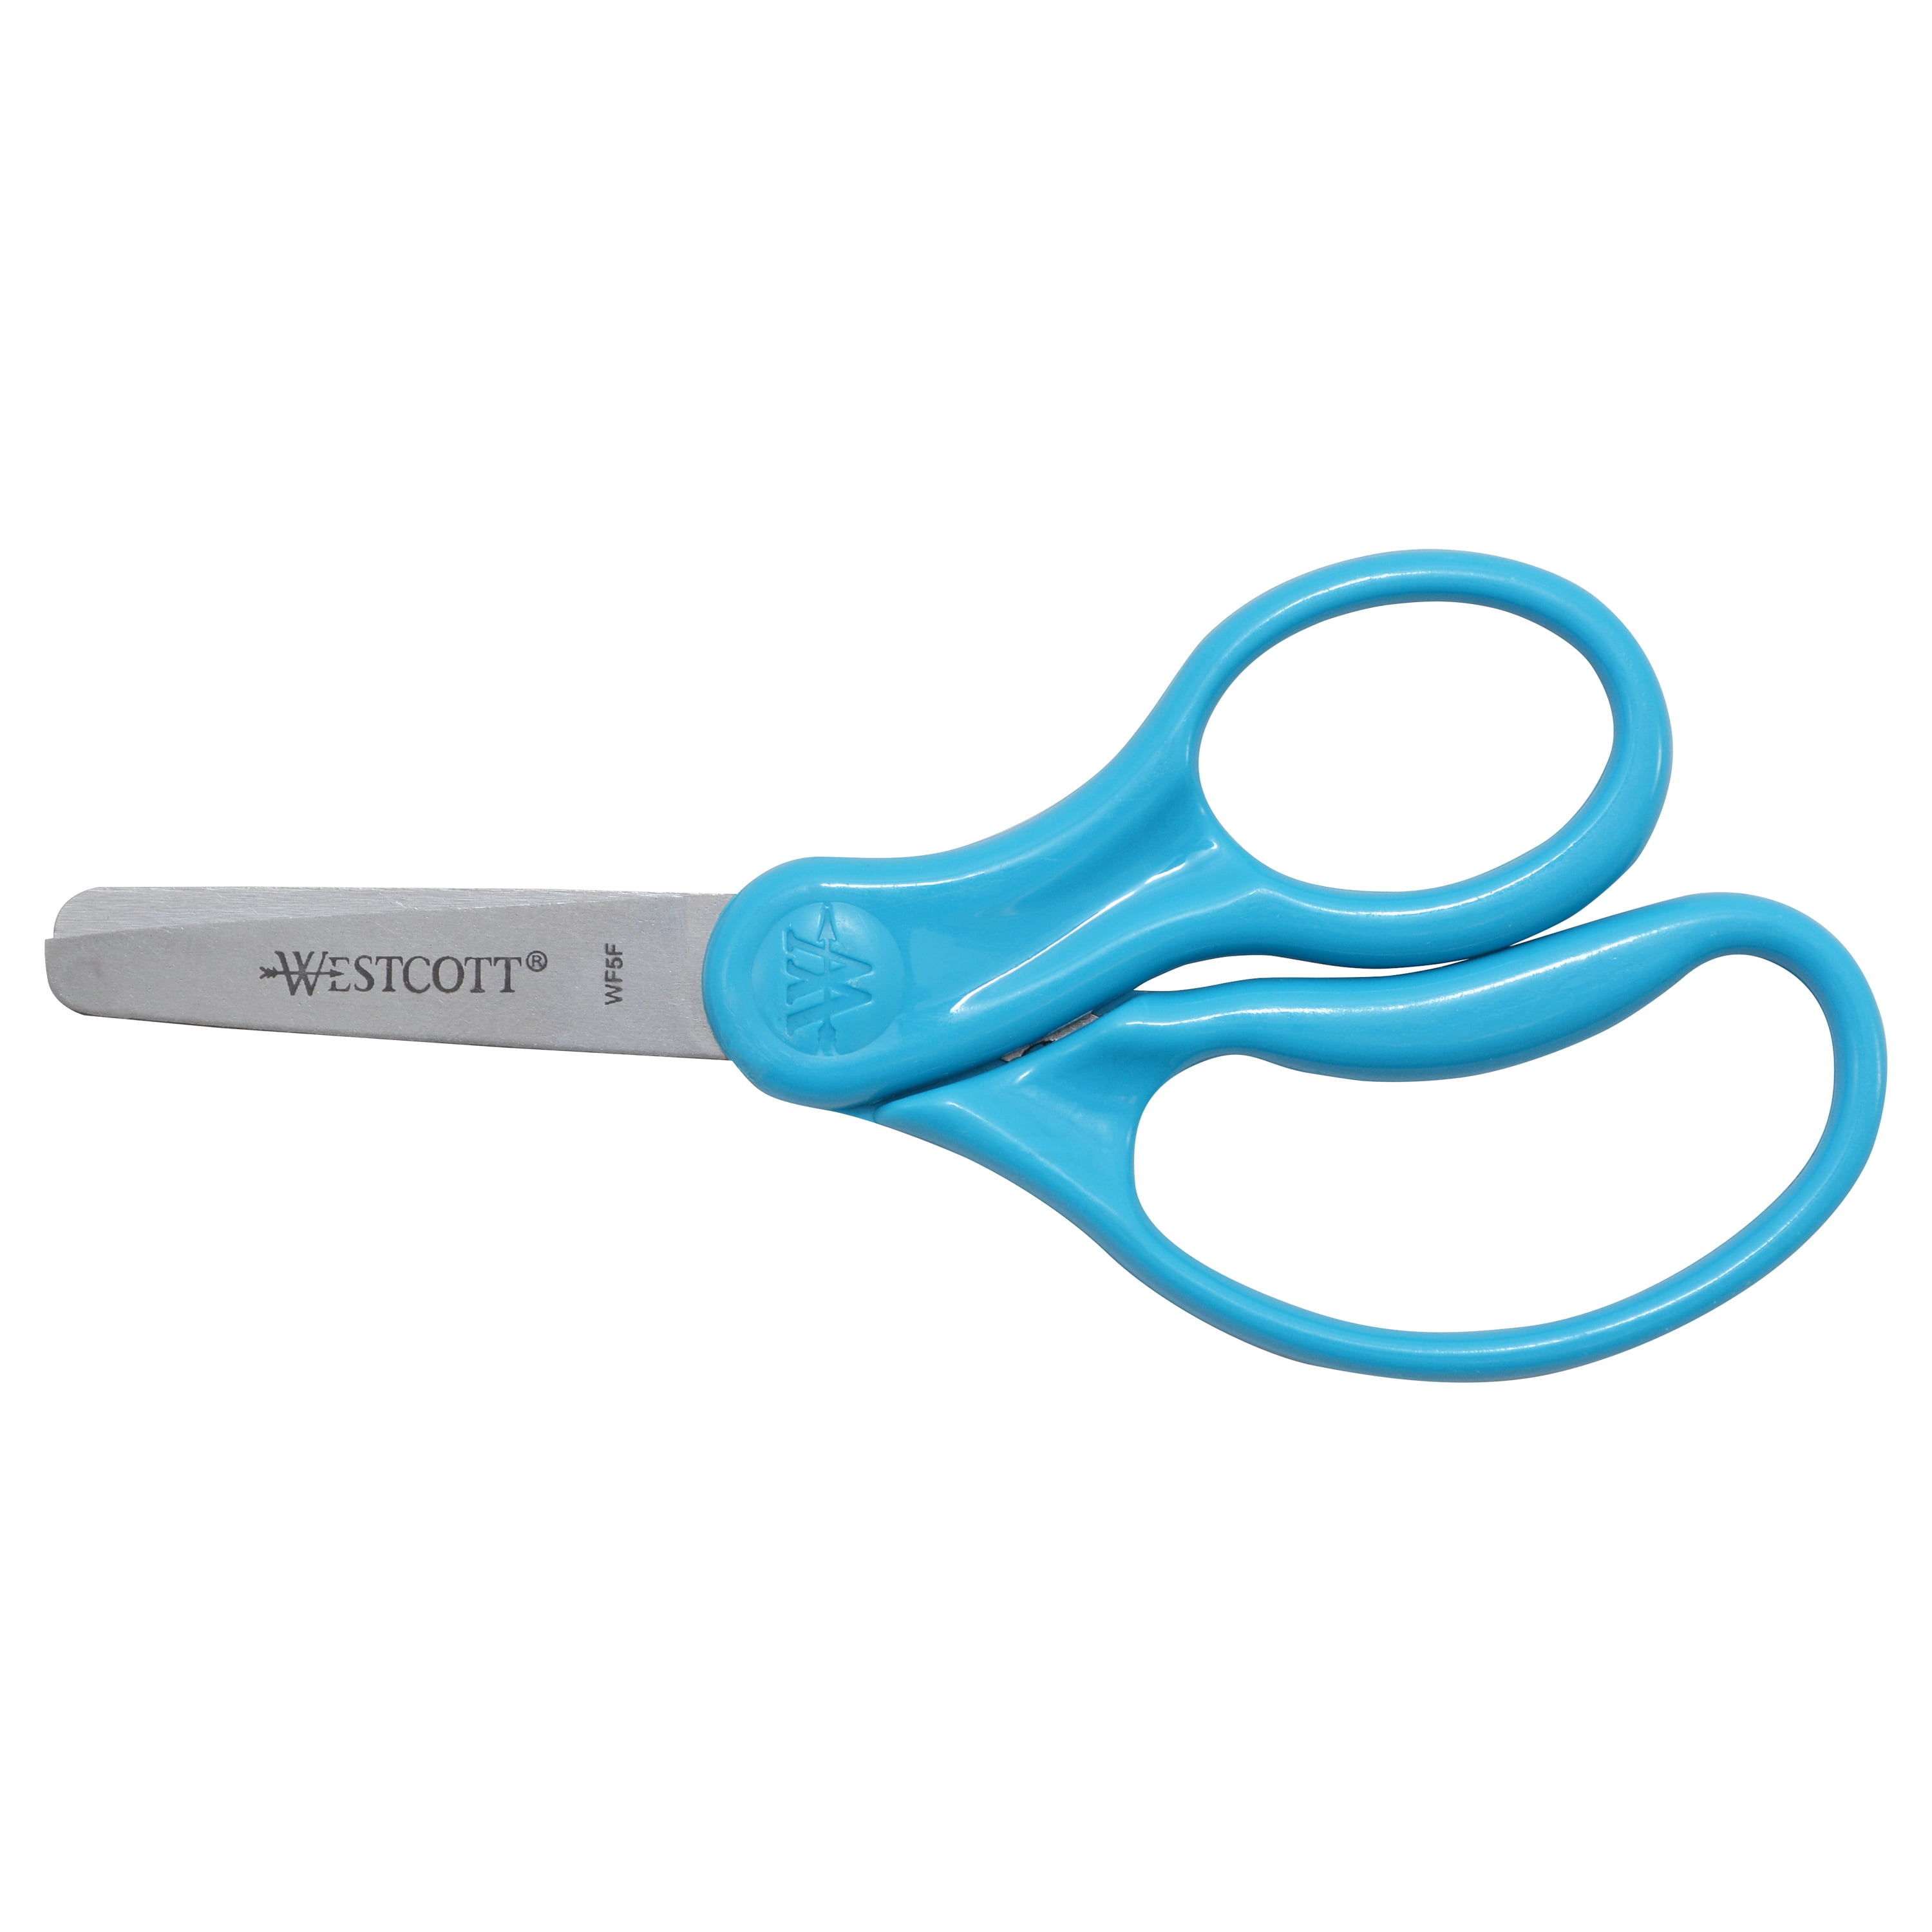  Westcott 13168 Right- and Left-Handed Scissors, Kids' Scissors,  Ages 4-8, 5-Inch Blunt Tip, Assorted, 2 Pack : Students Round Edge Scissors  : Toys & Games